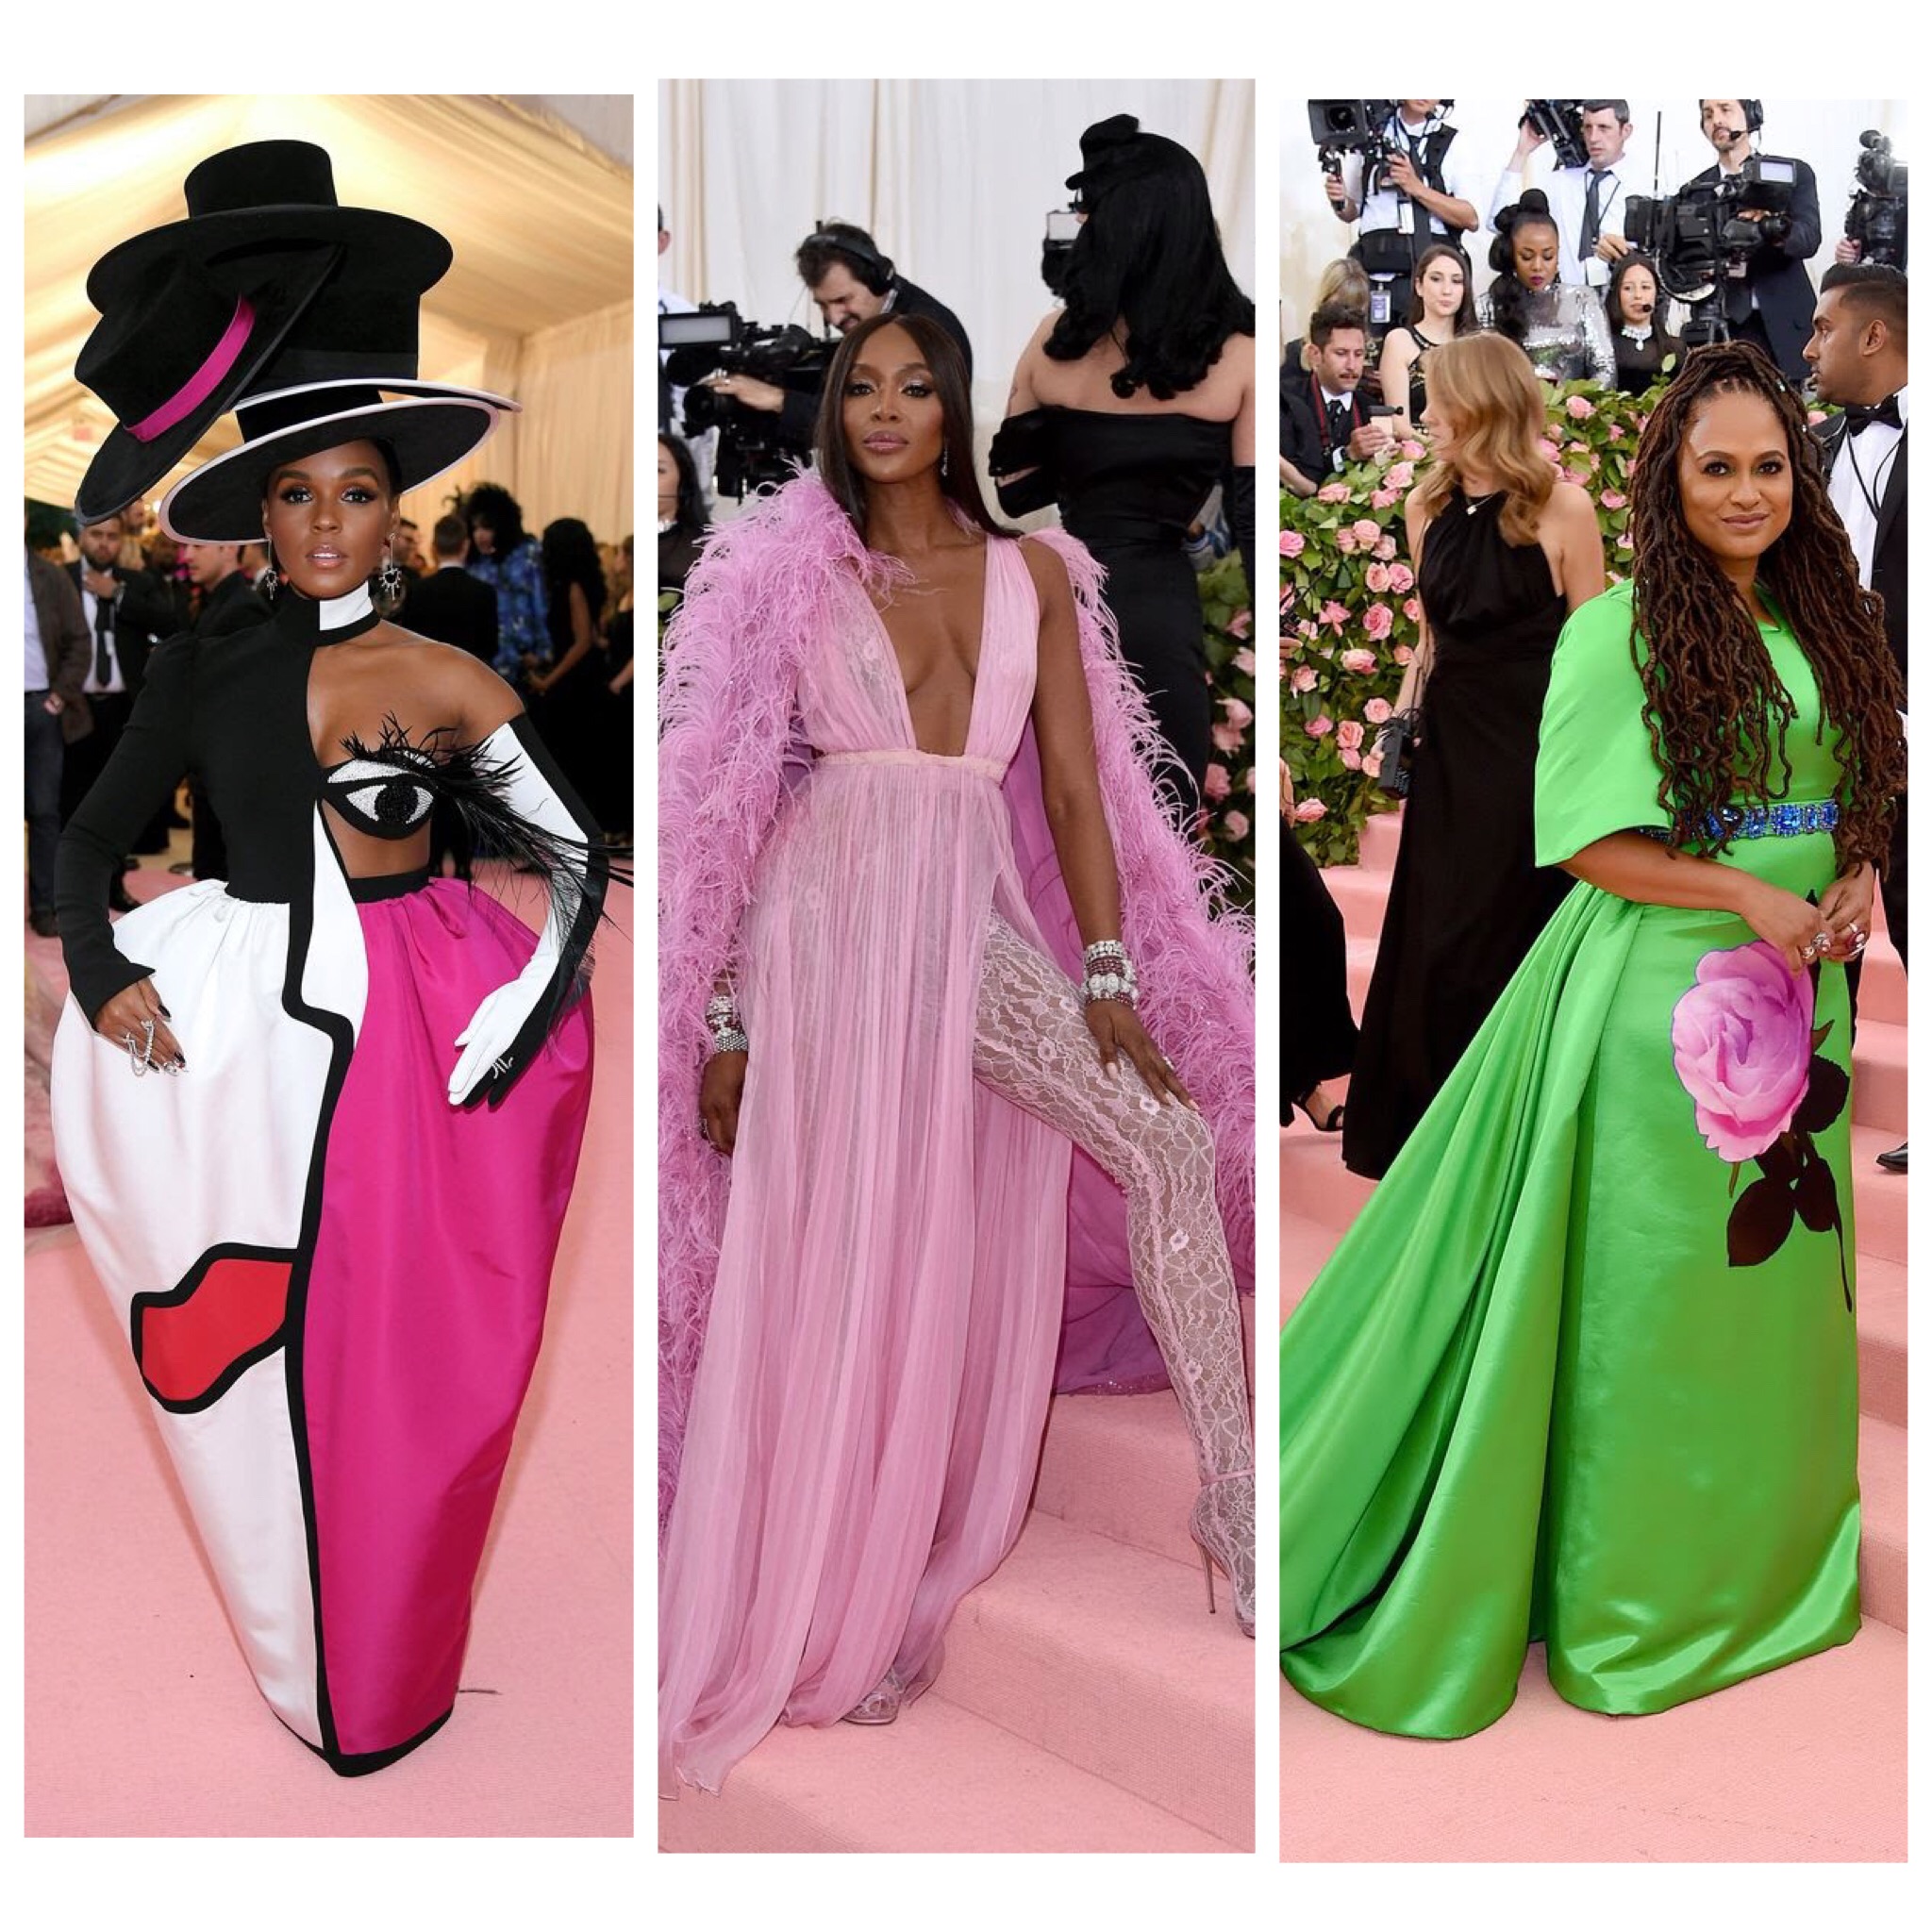 MOre Campy Looks at the 2019 Met Gala: Janelle Monae, Supermodel Naomi Campbell, and Filmmaker Ava DuVernay